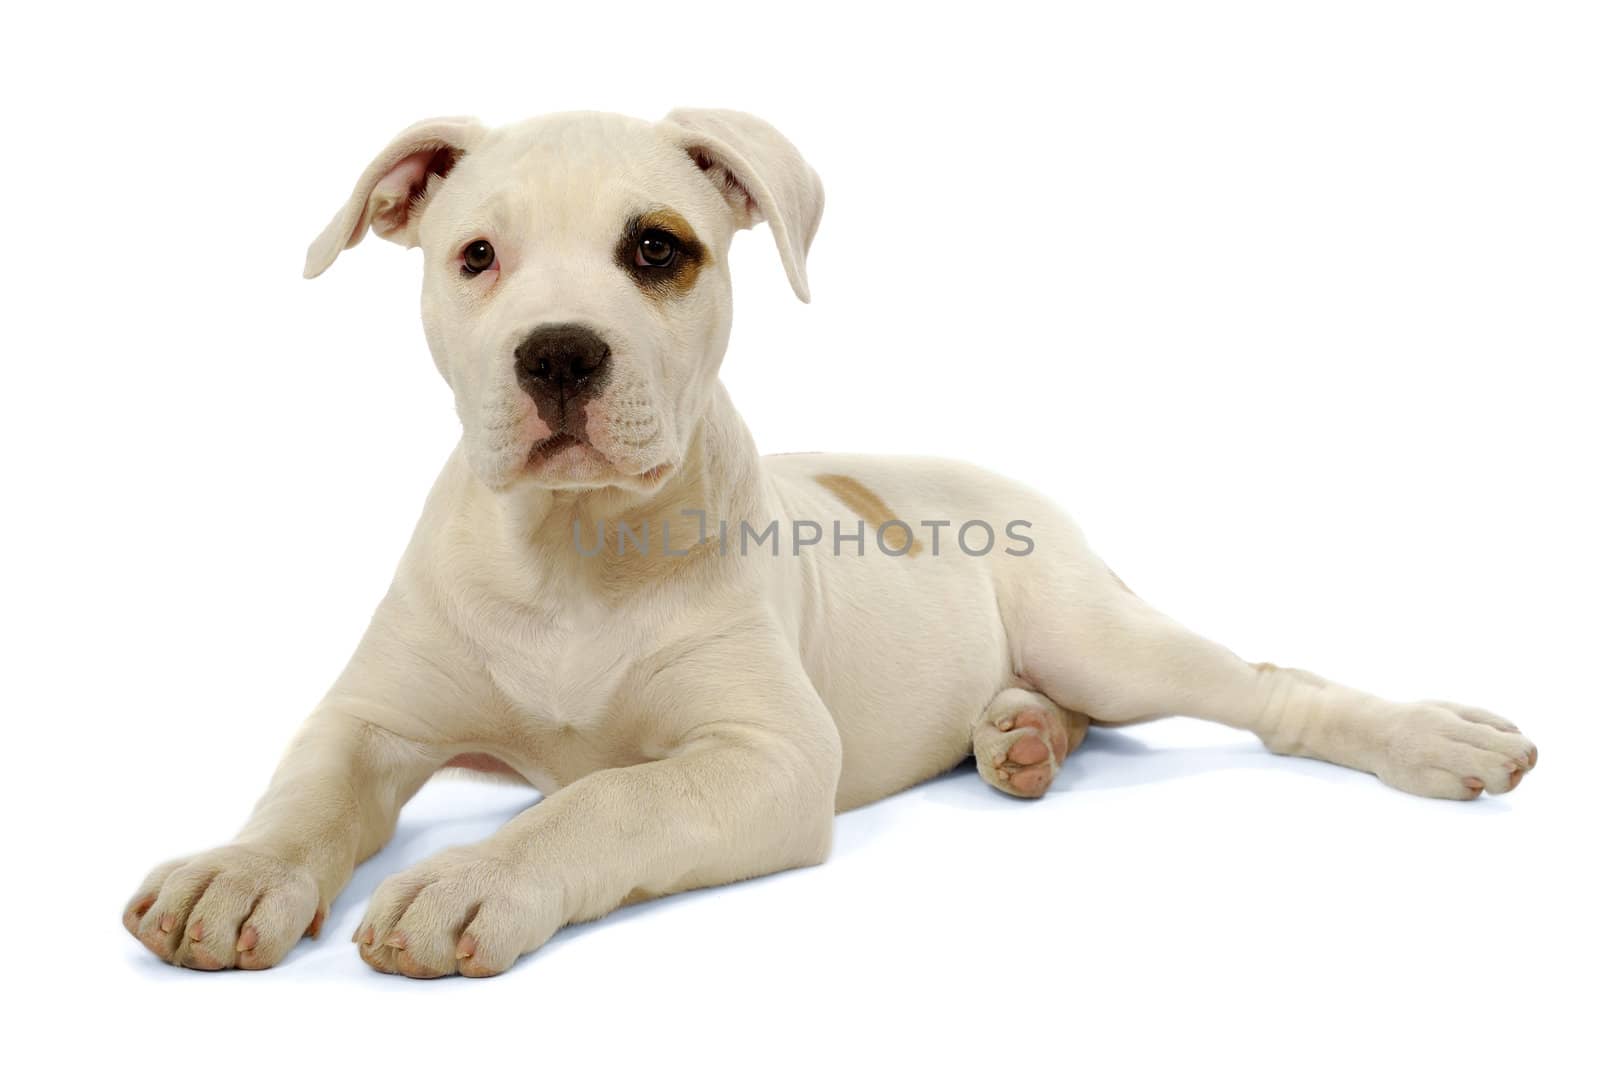 Puppy is resting on a white background